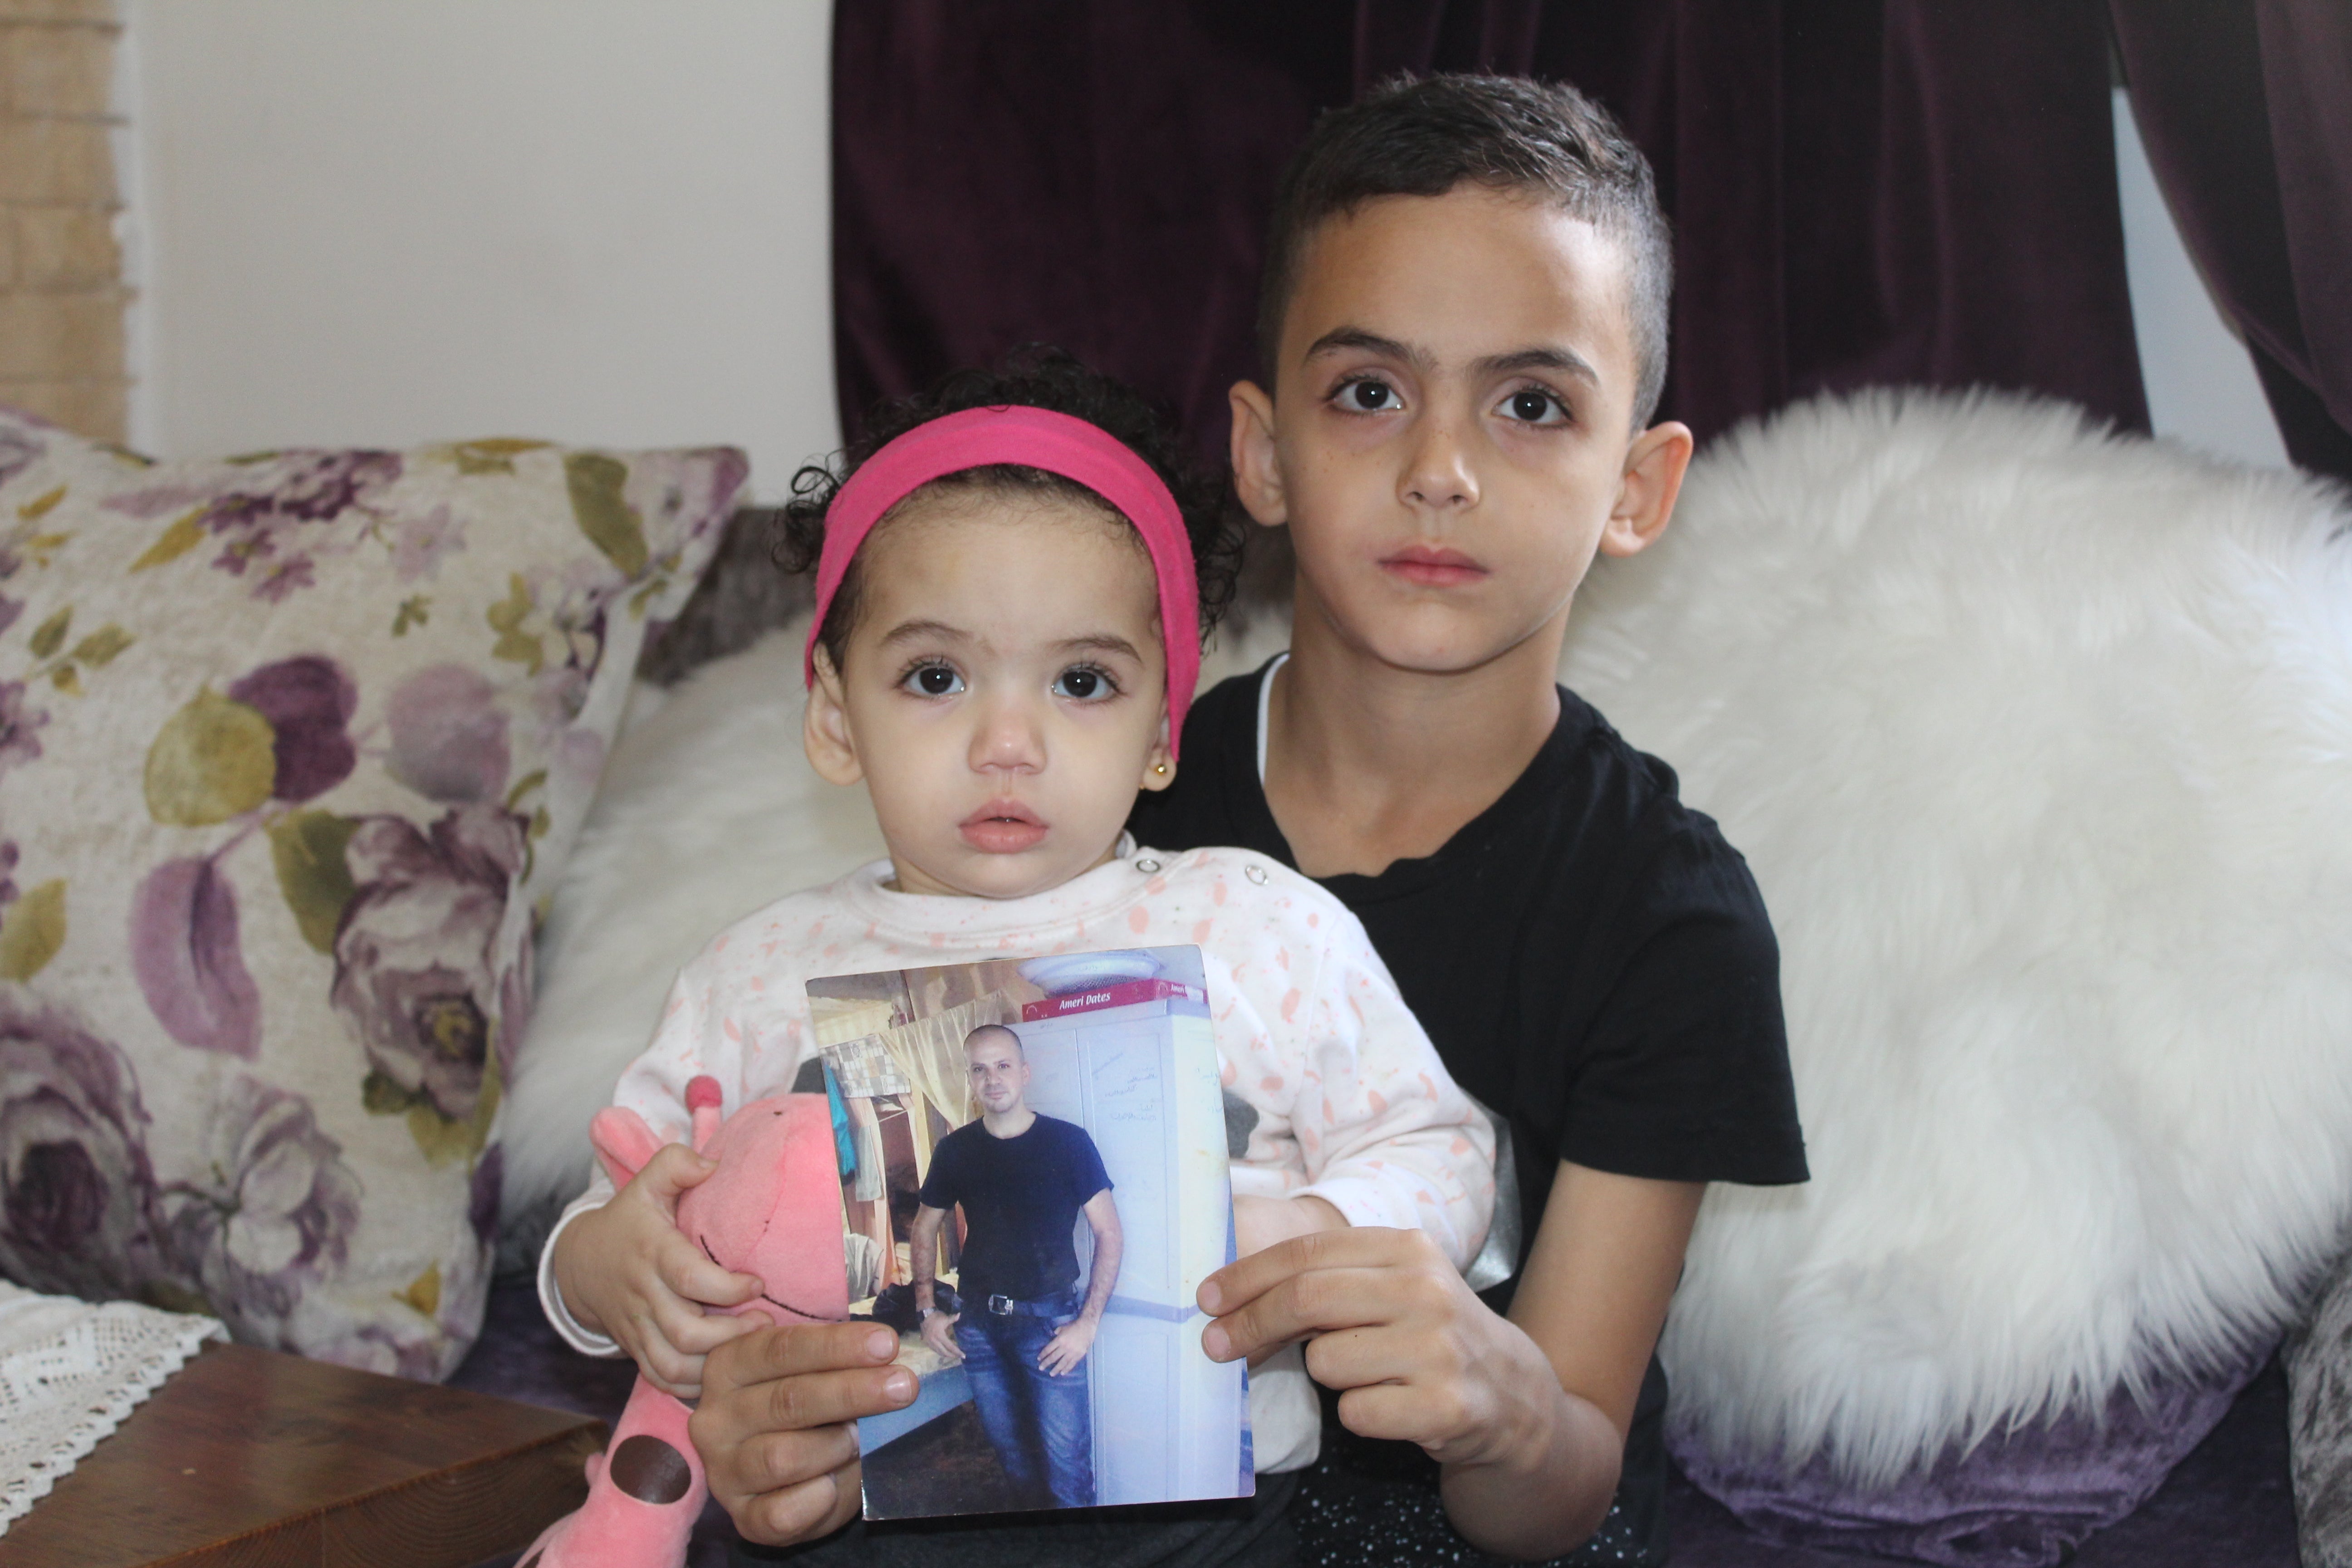 Son Mohammad and daughter Nour holding a photo of their father Shadi Abu Aker, currently detained by Israel